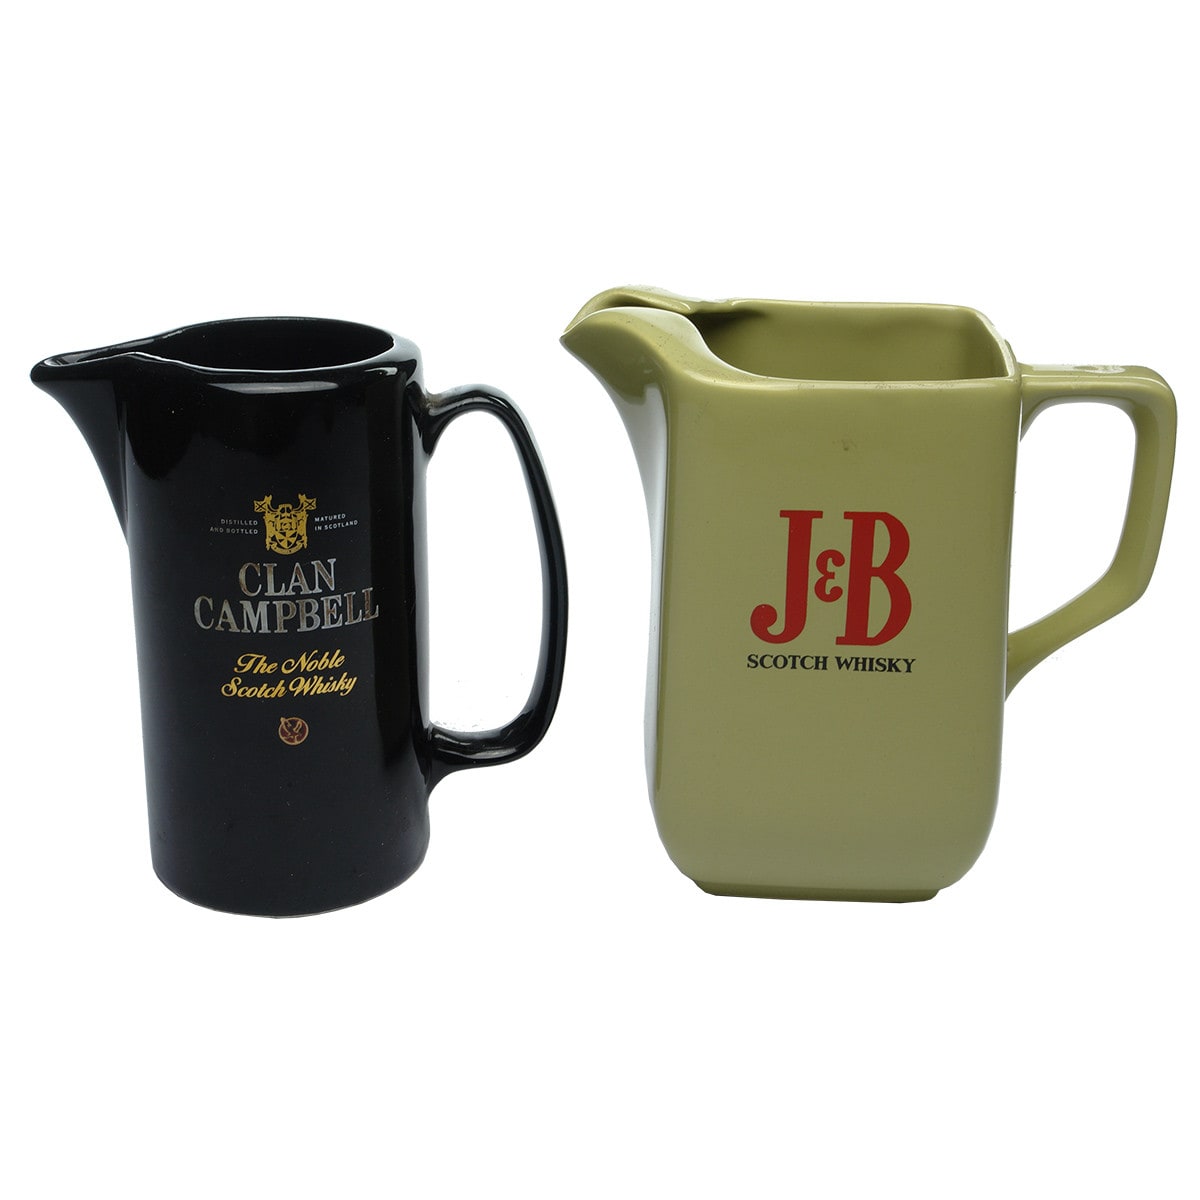 2 Whisky Water Jugs. Clan Campbell The Noble Scotch Whisky Water Jug, Made in China; J & B Scotch Whisky Water Jug, made by Wade.